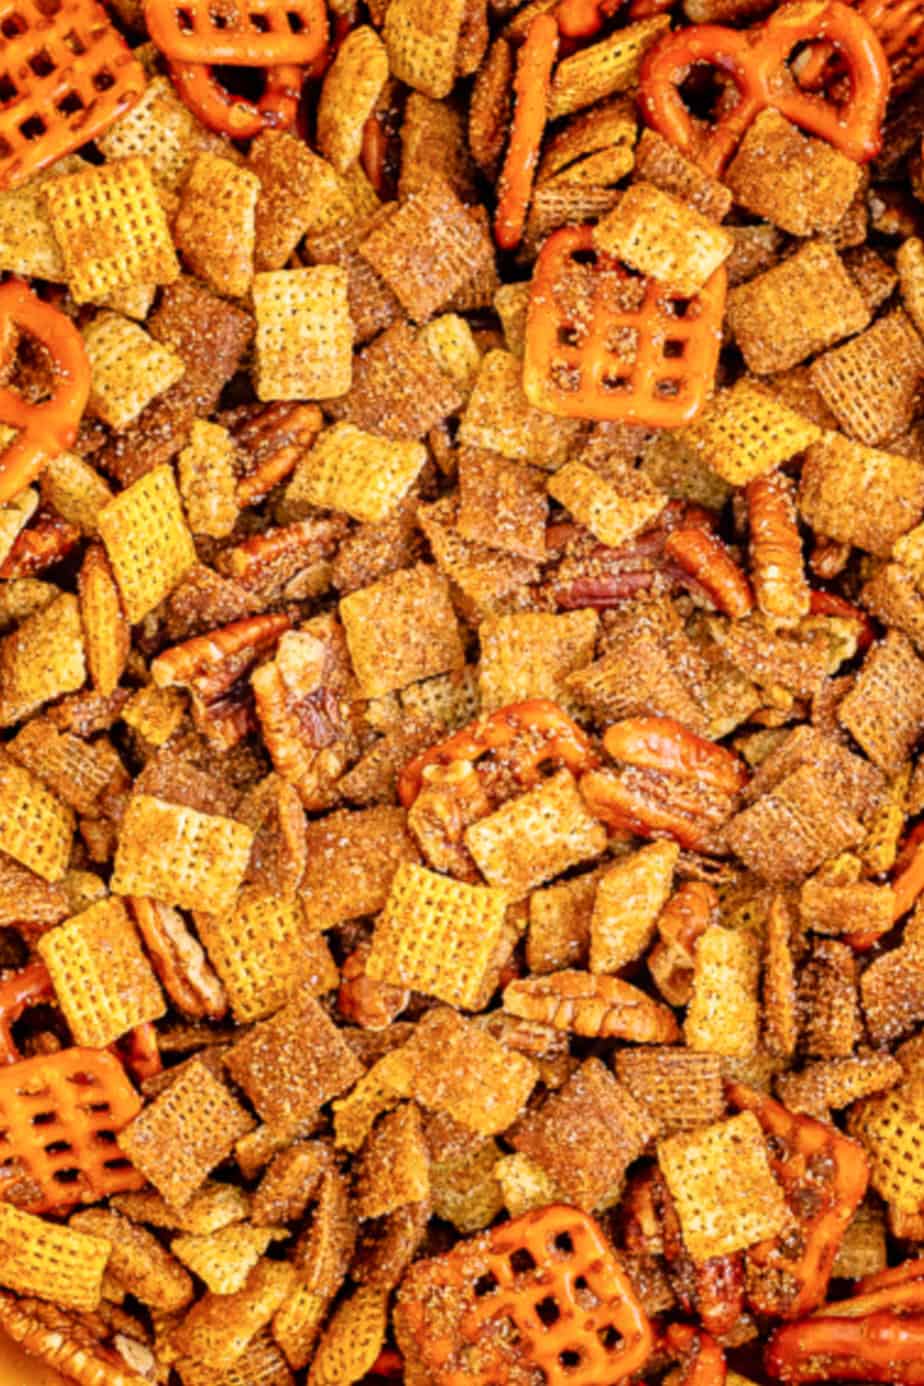 Cinnamon sugar chex mix close up with a mixture of chex cereals, pretzels, pecans and the crunch topping from overhead zoomed in.